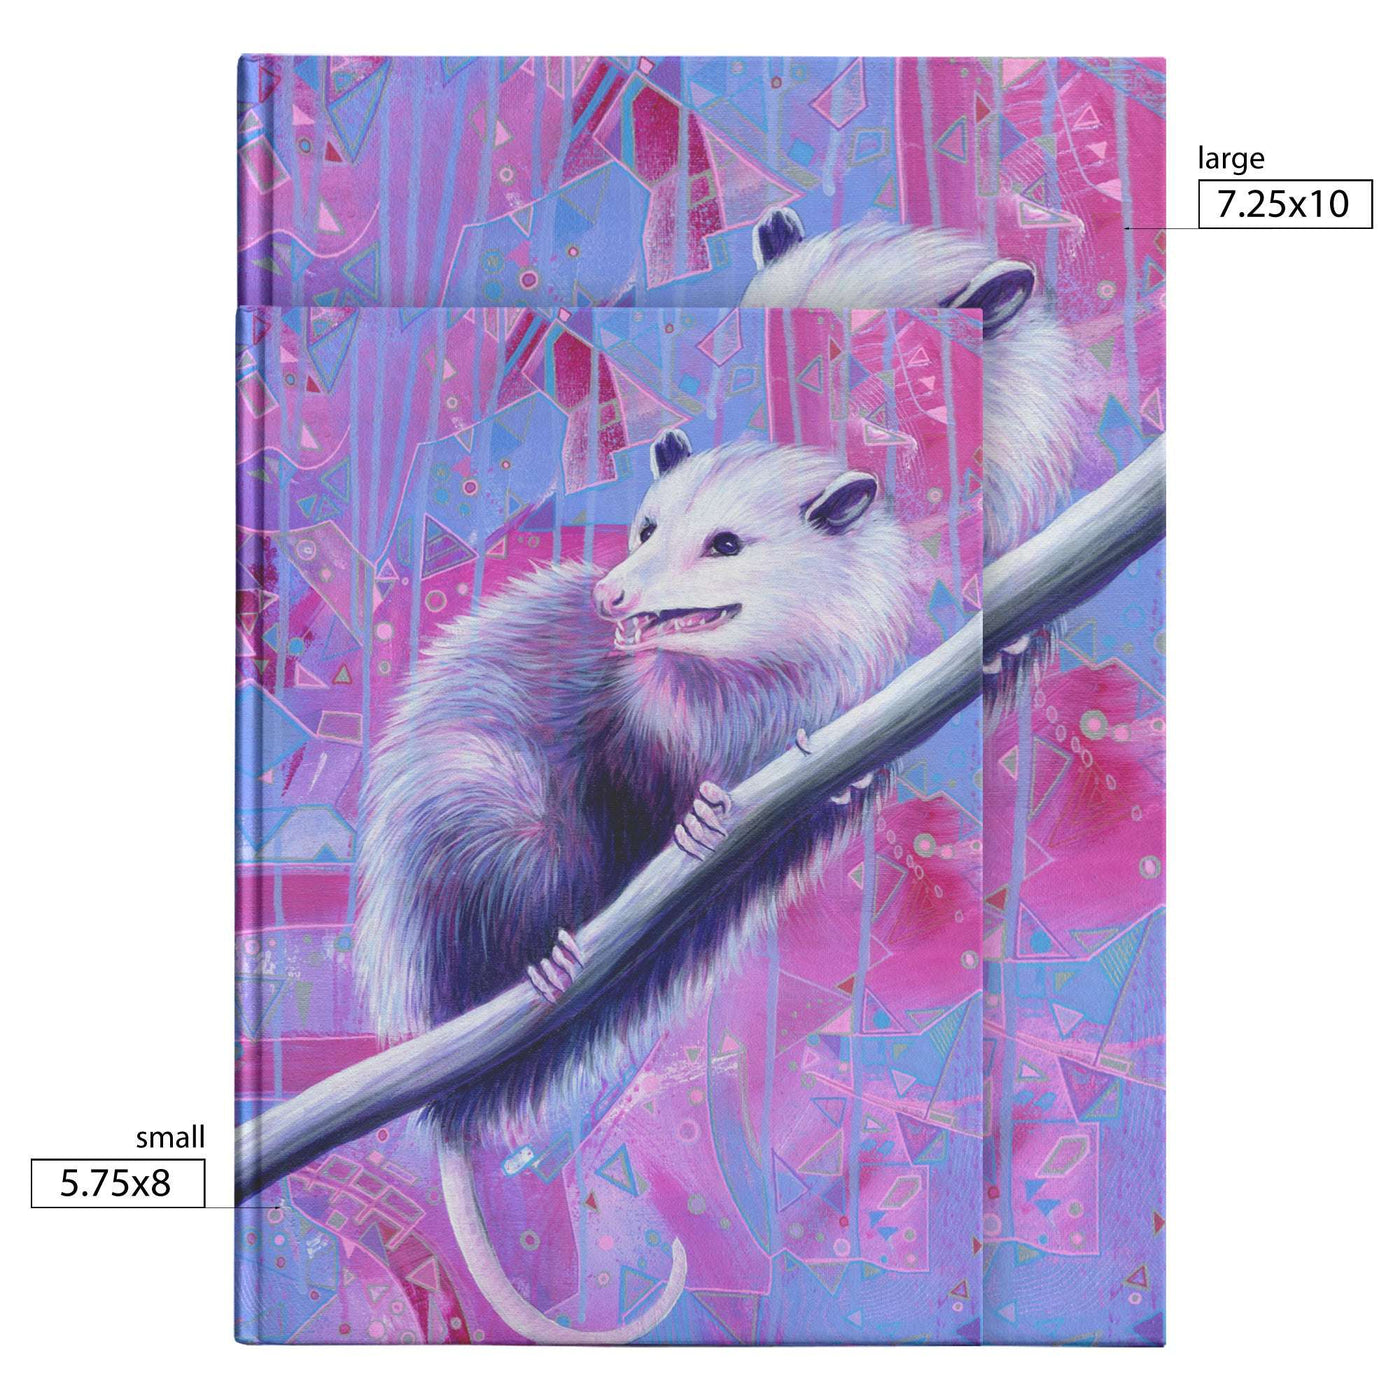 Various sizes of Opossum Journal are displayed, featuring a white opossum climbing a wooden branch against a colorful abstract geometric background, with size labels for the "small" and "large" versions.